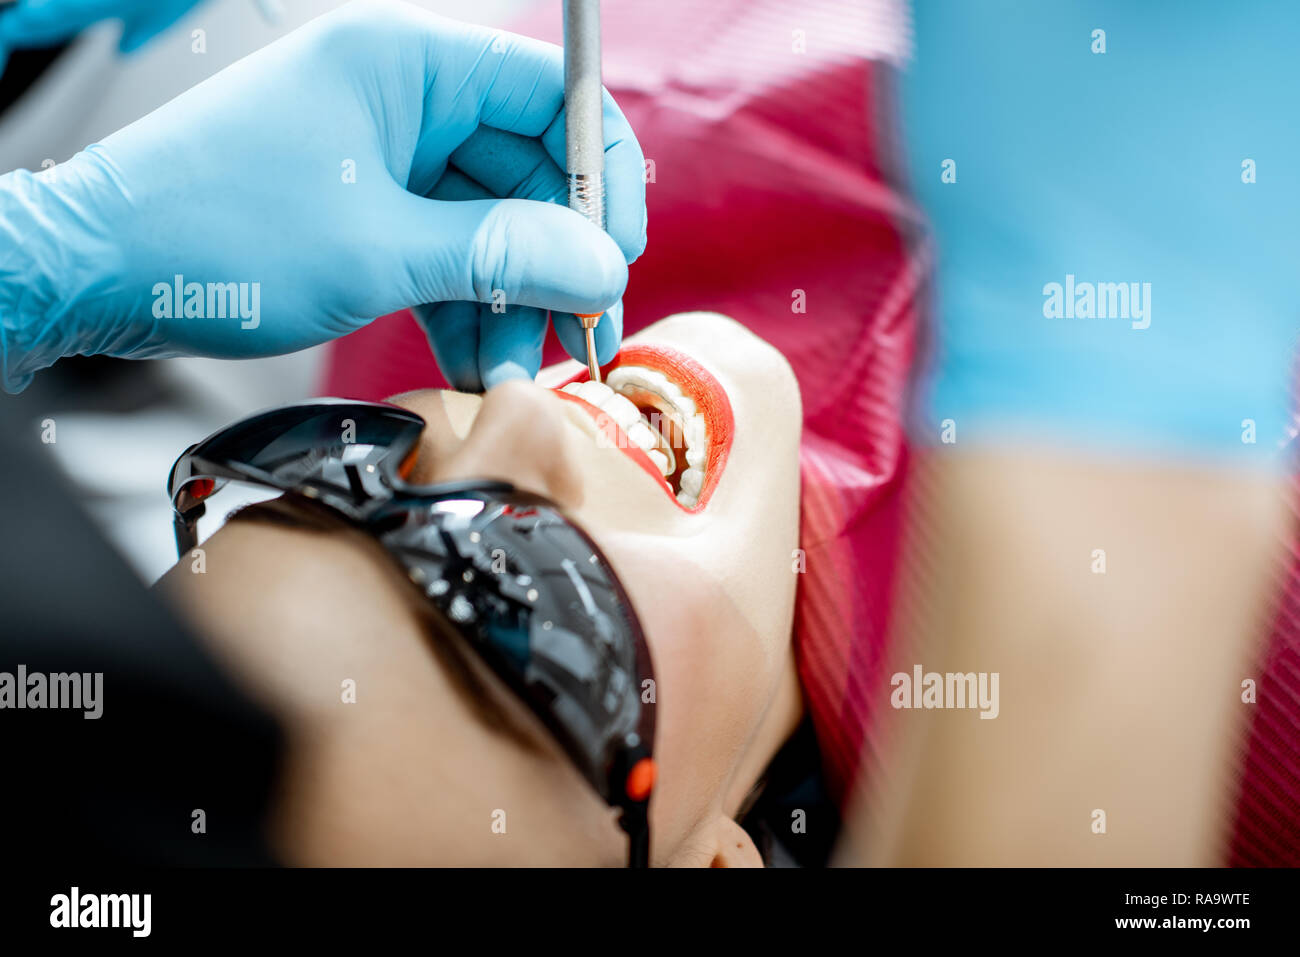 Close-up of a woman's face during the professional dental examination Stock Photo